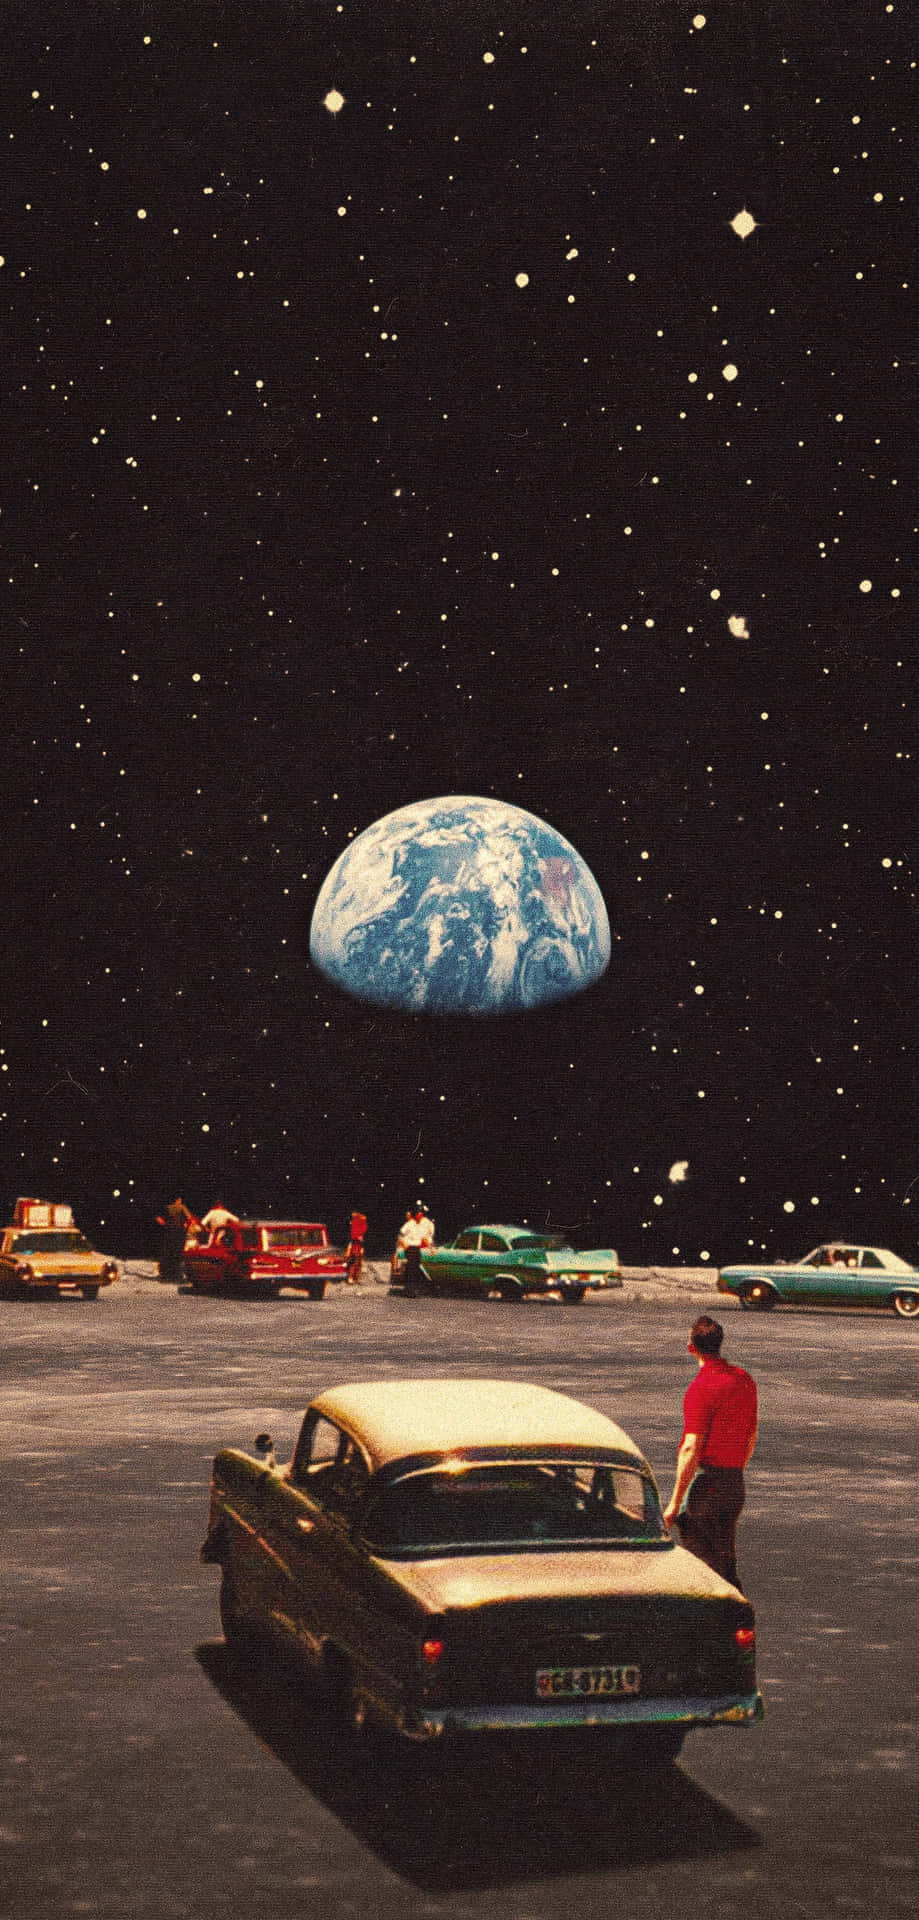 Download Vintage Trippy Retro Aesthetic Car Parked On The Moon Wallpaper